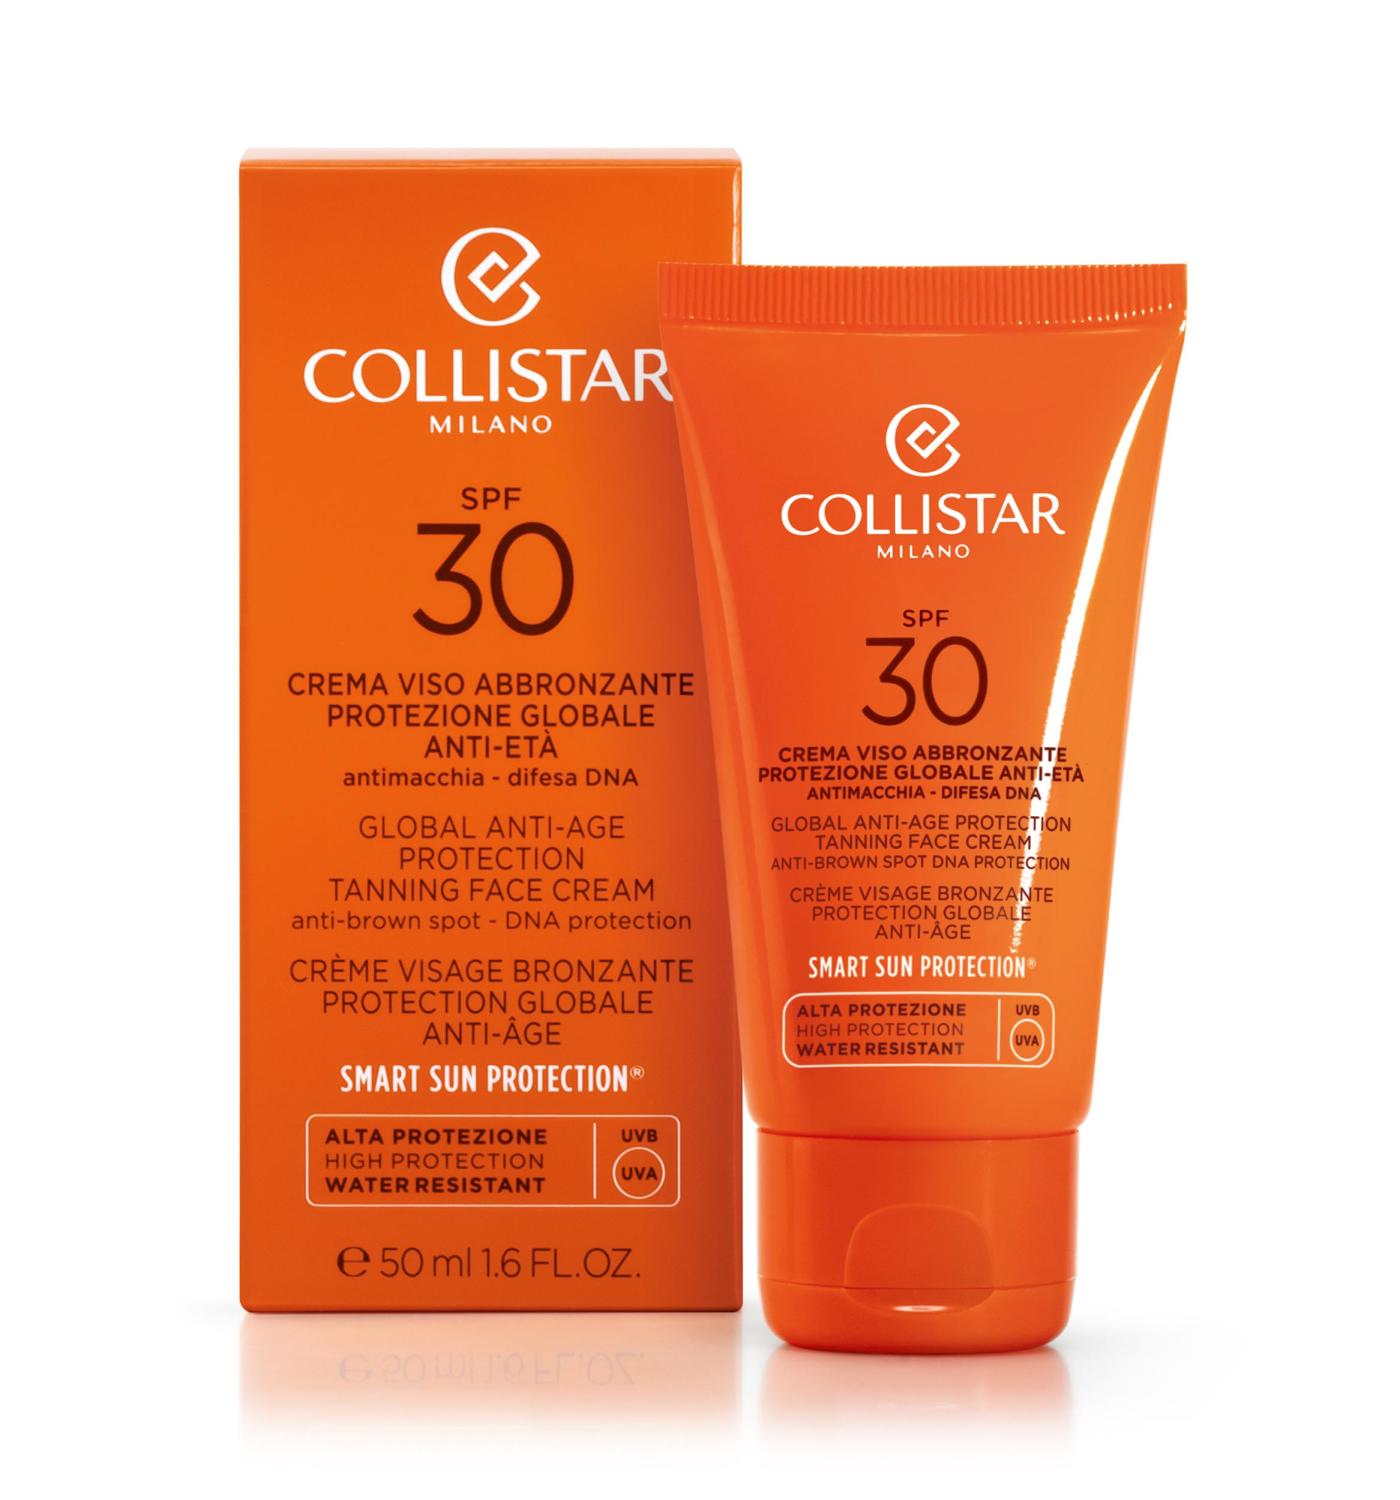 Collistar Global Anti-Age Protection Tanning Face Cream Spf 30